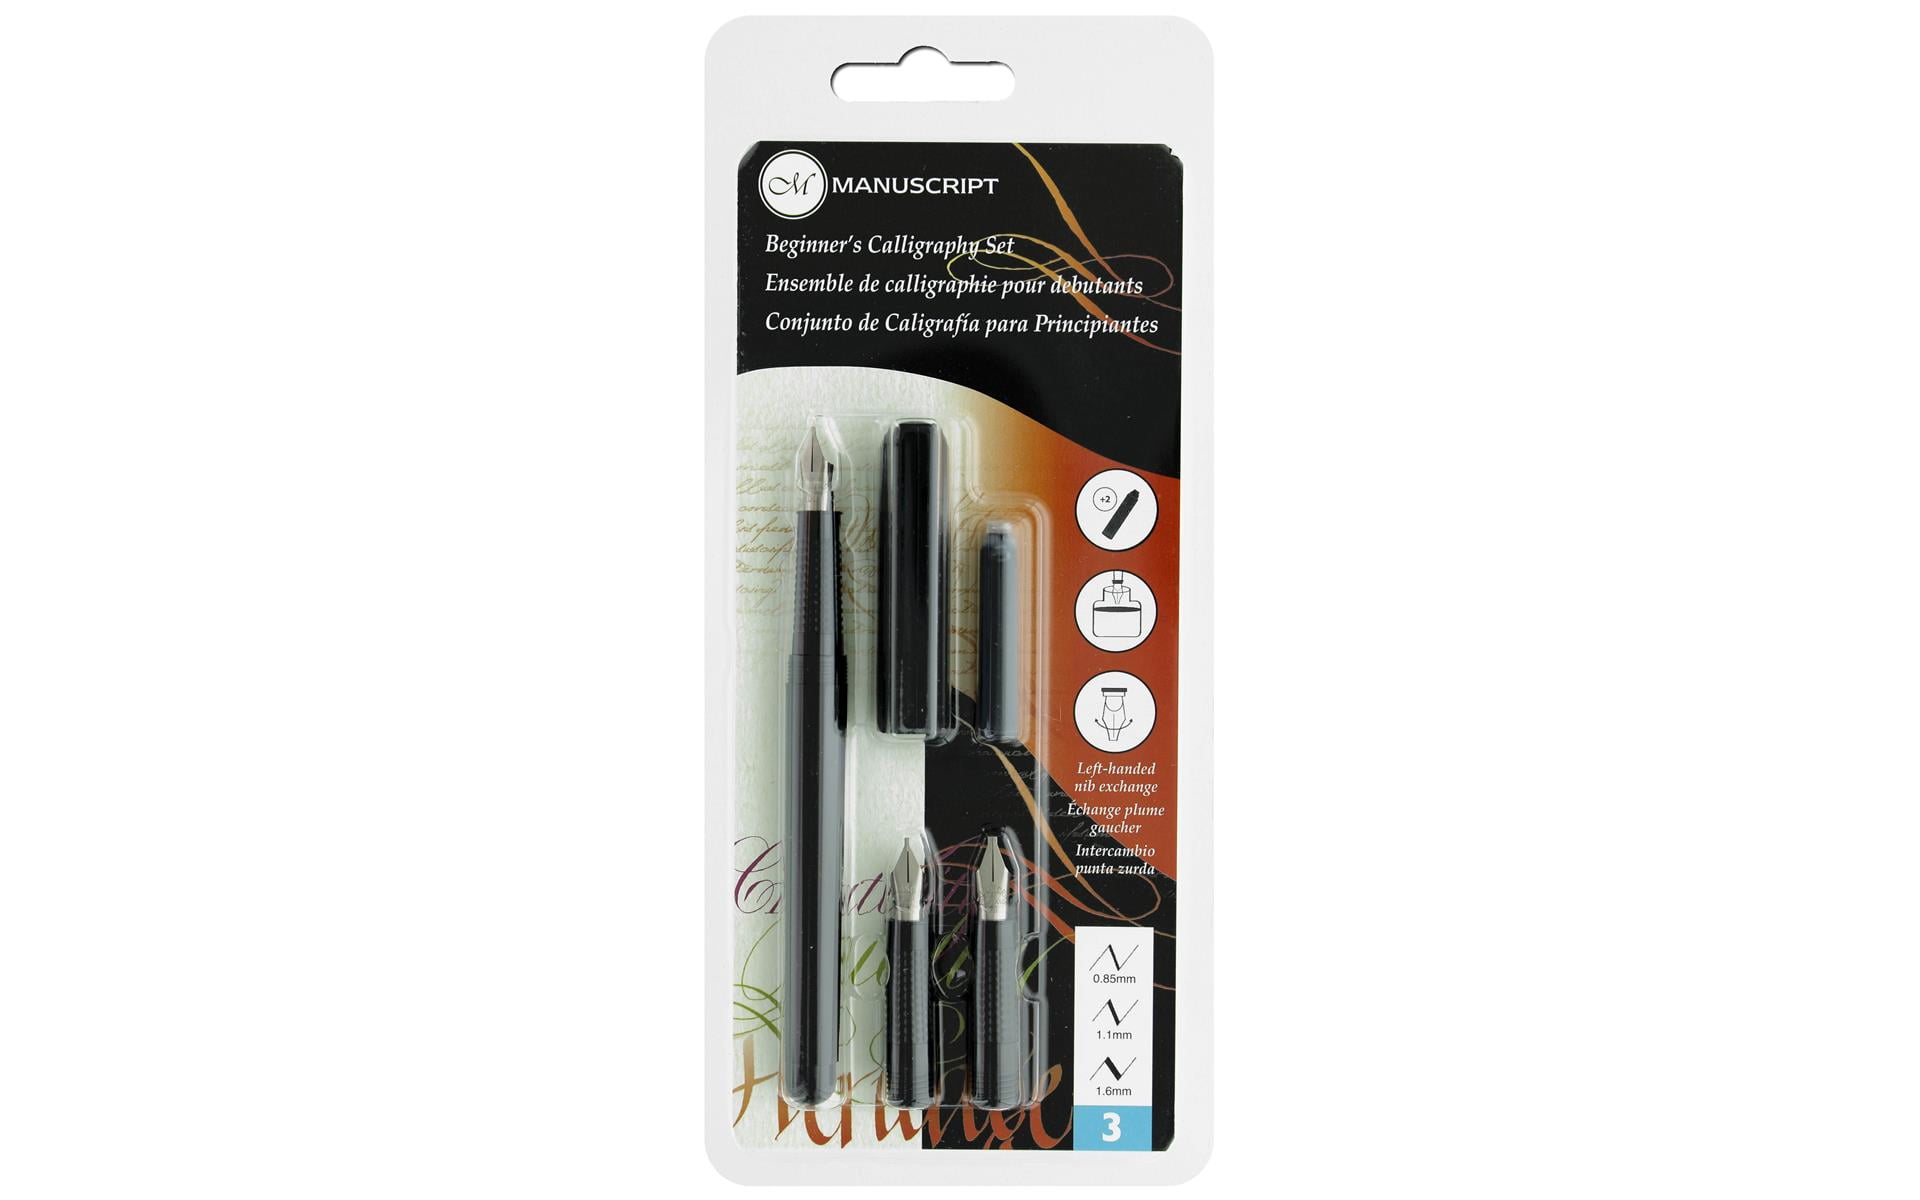 12/24 Colors Outline Markers Shimmer Markers Set Self-Outline Metallic  Markers for Doodling Drawing and Calligraphy 12 Colors